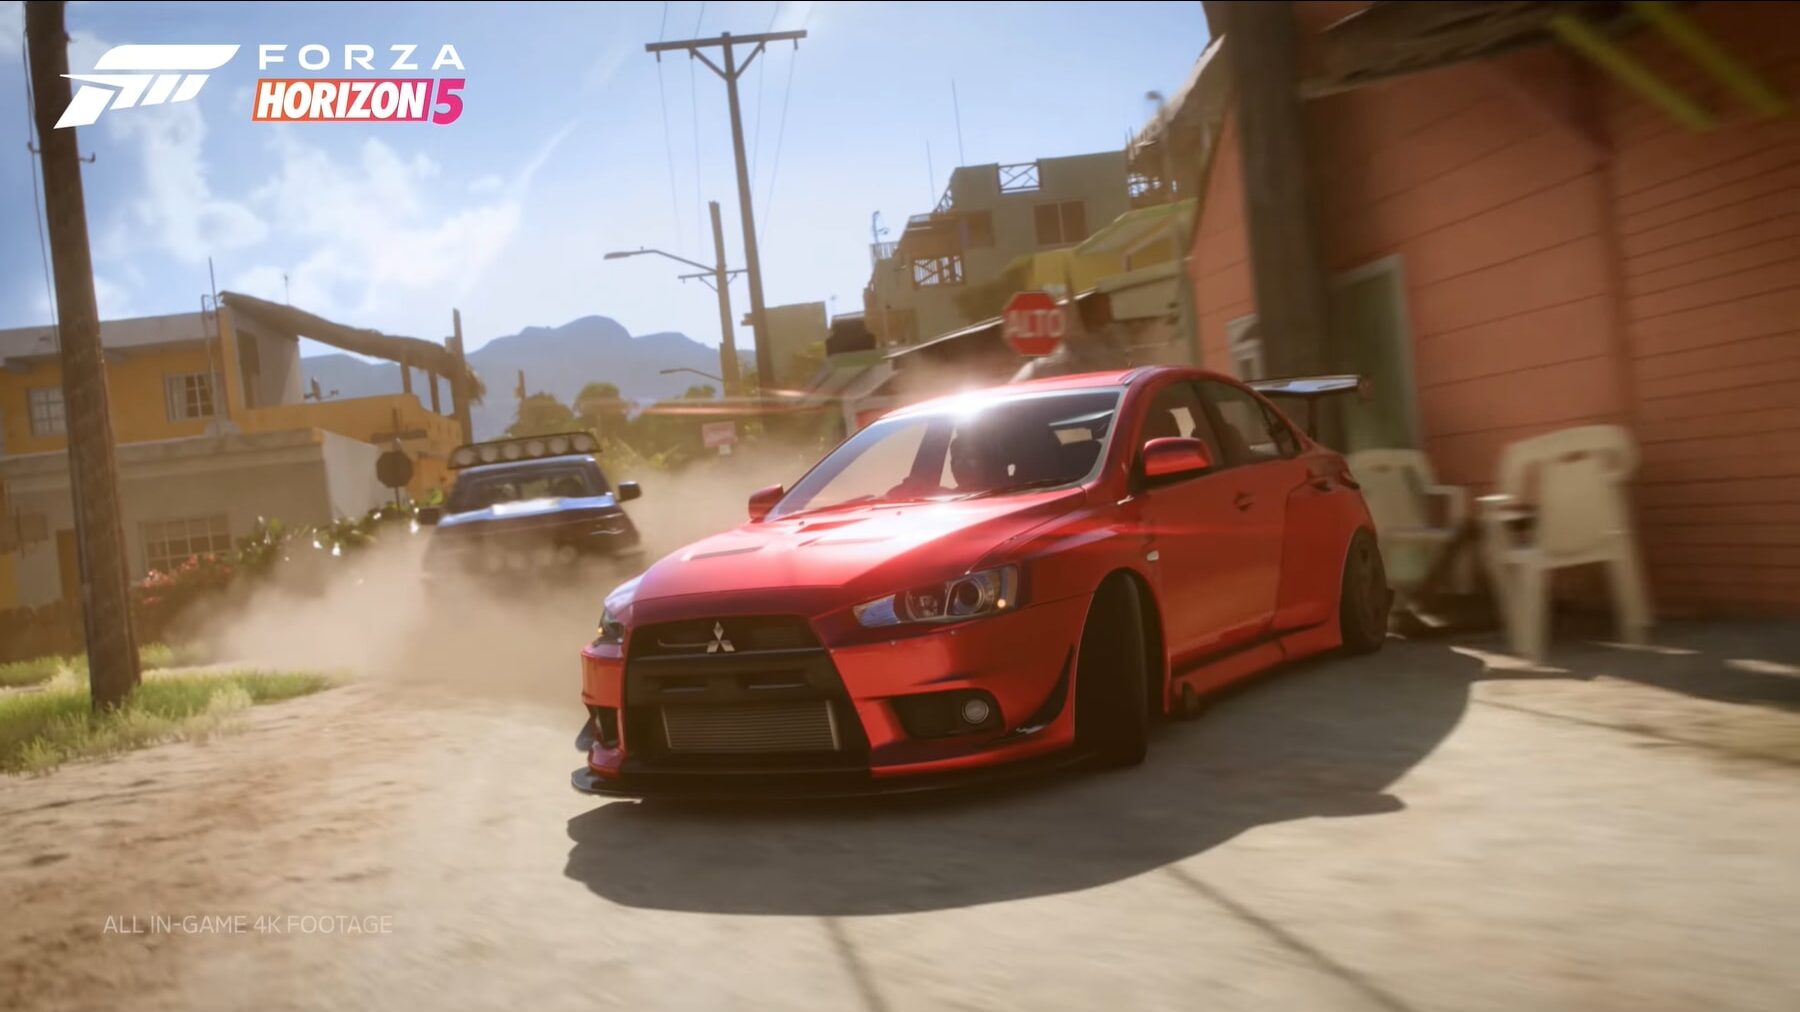 Forza Horizon 5 Car List : Mxzsvym Xvgh7m / See if your favorite makes